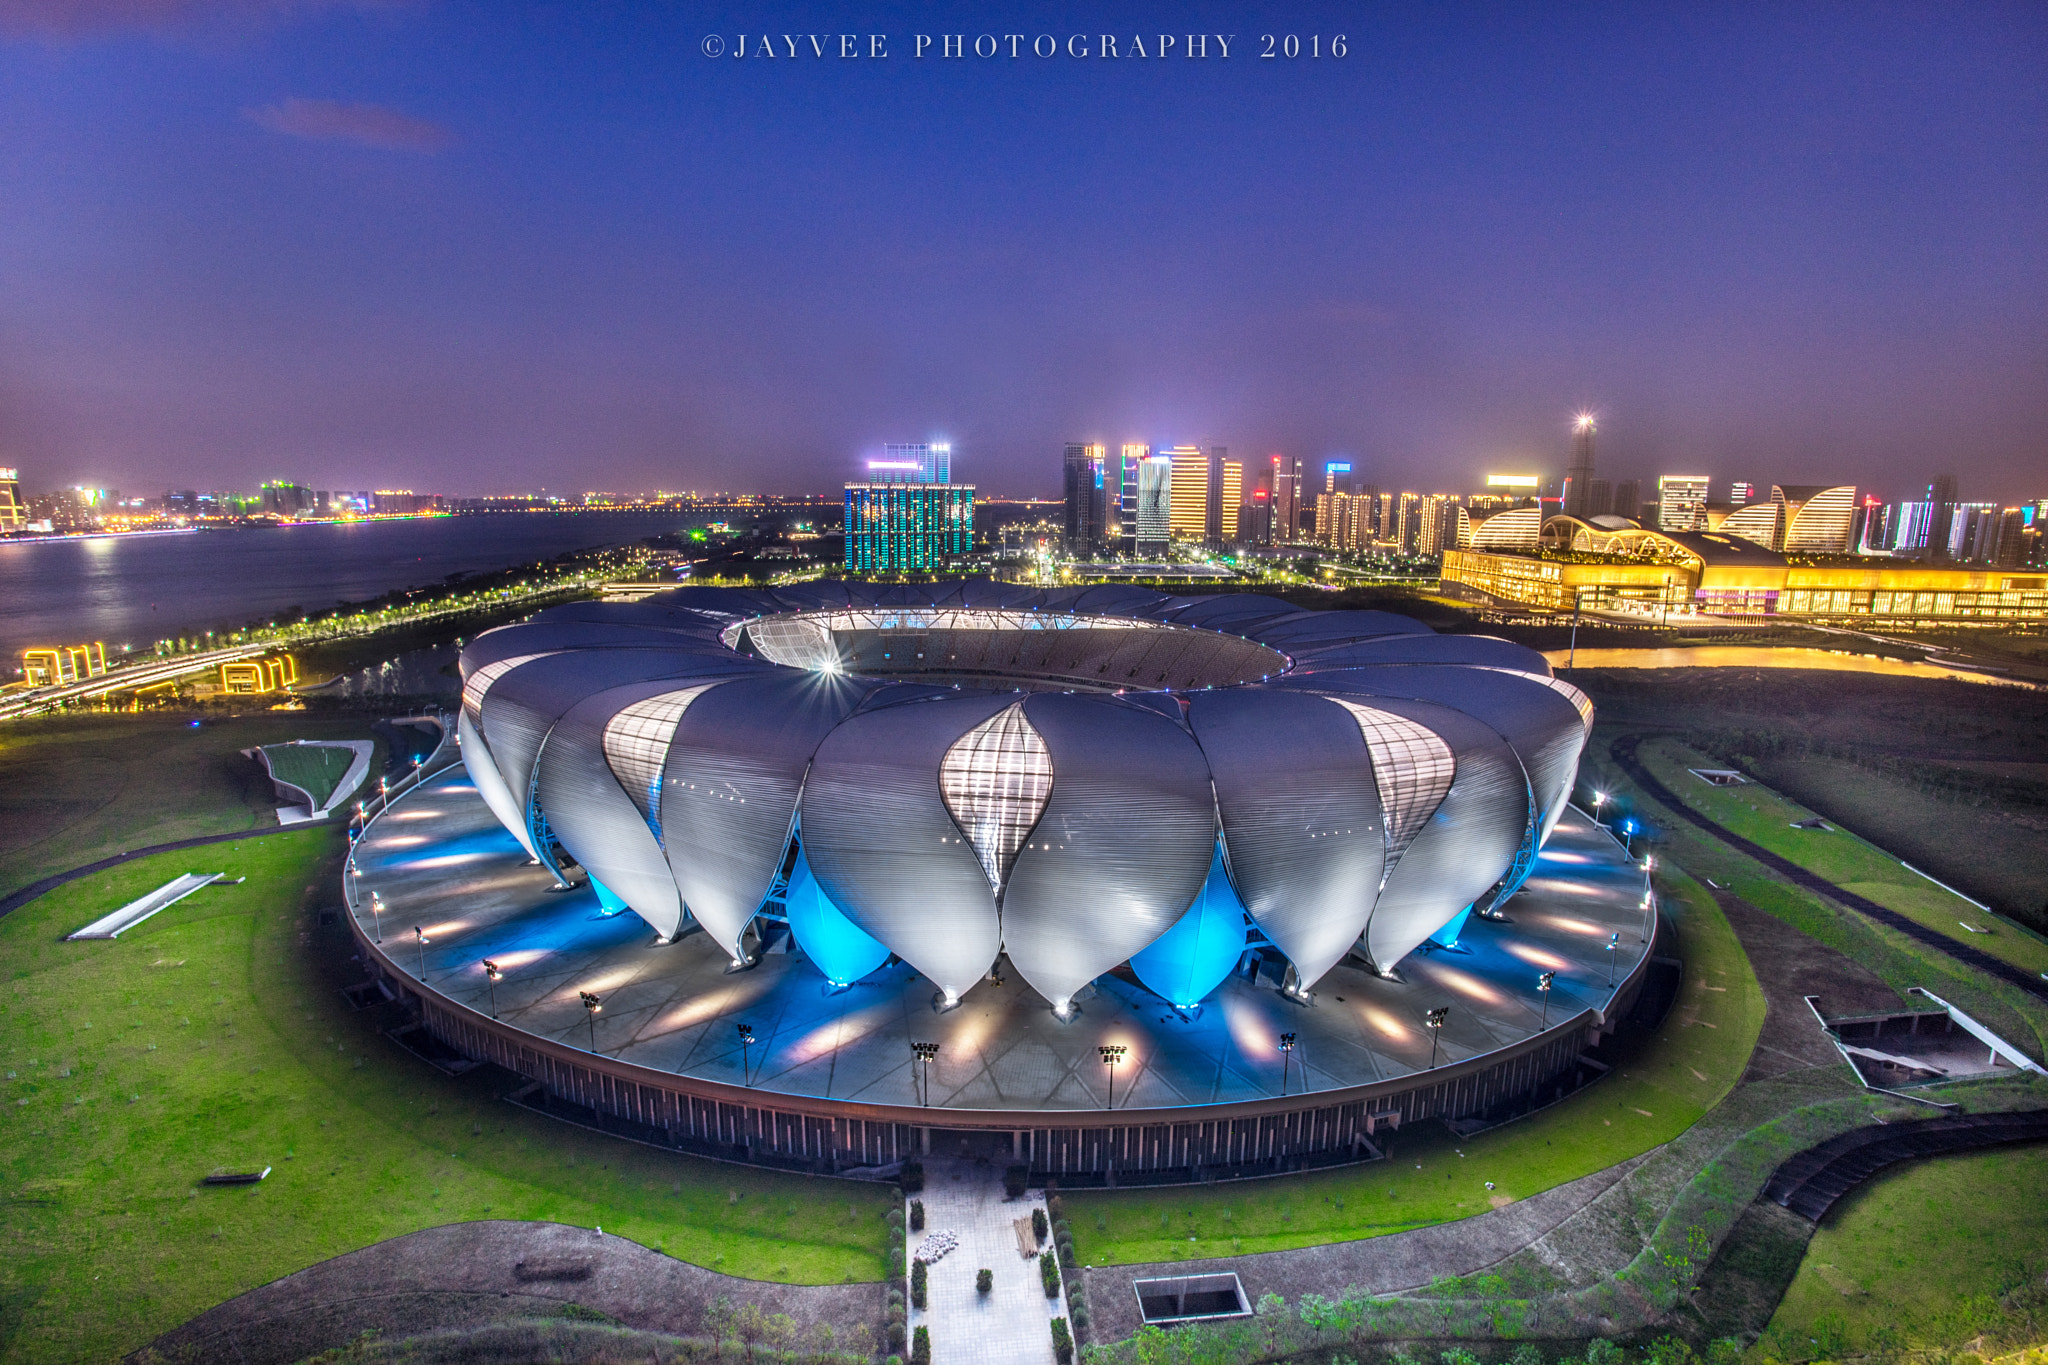 Sony a7 sample photo. The main stadium of the hangzhou asian games photography